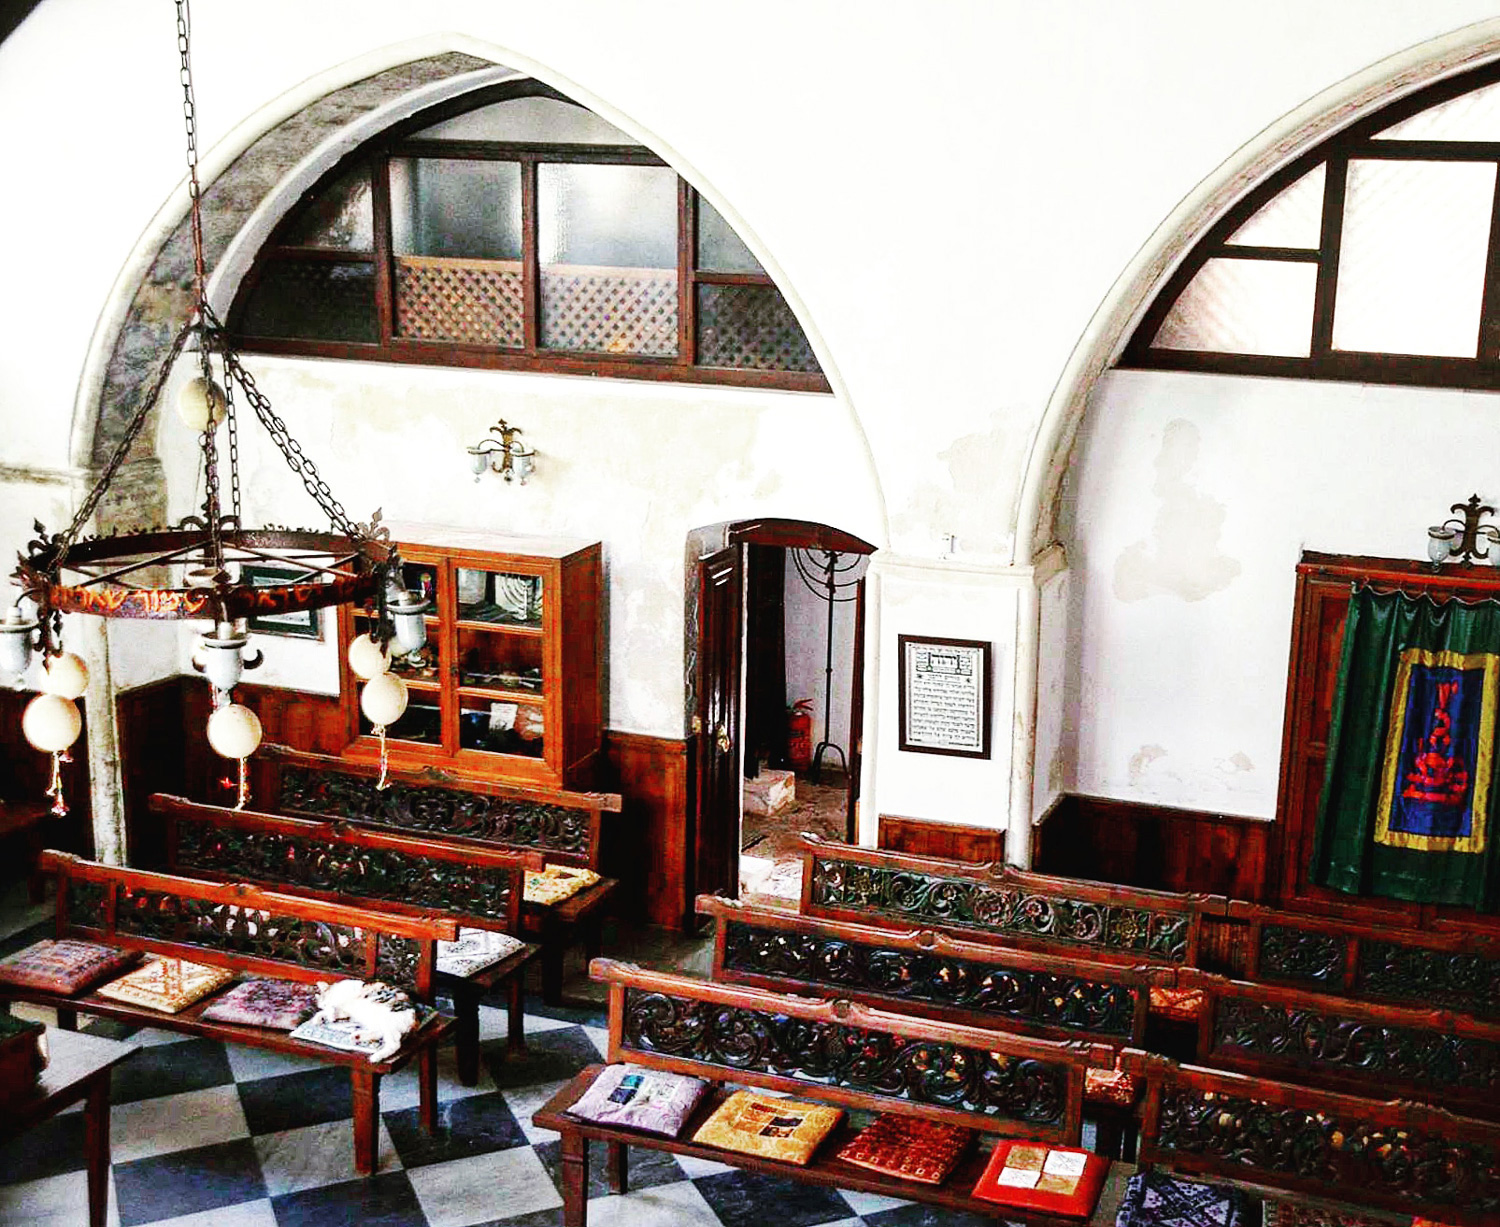 Praying room inside the synagogue from above